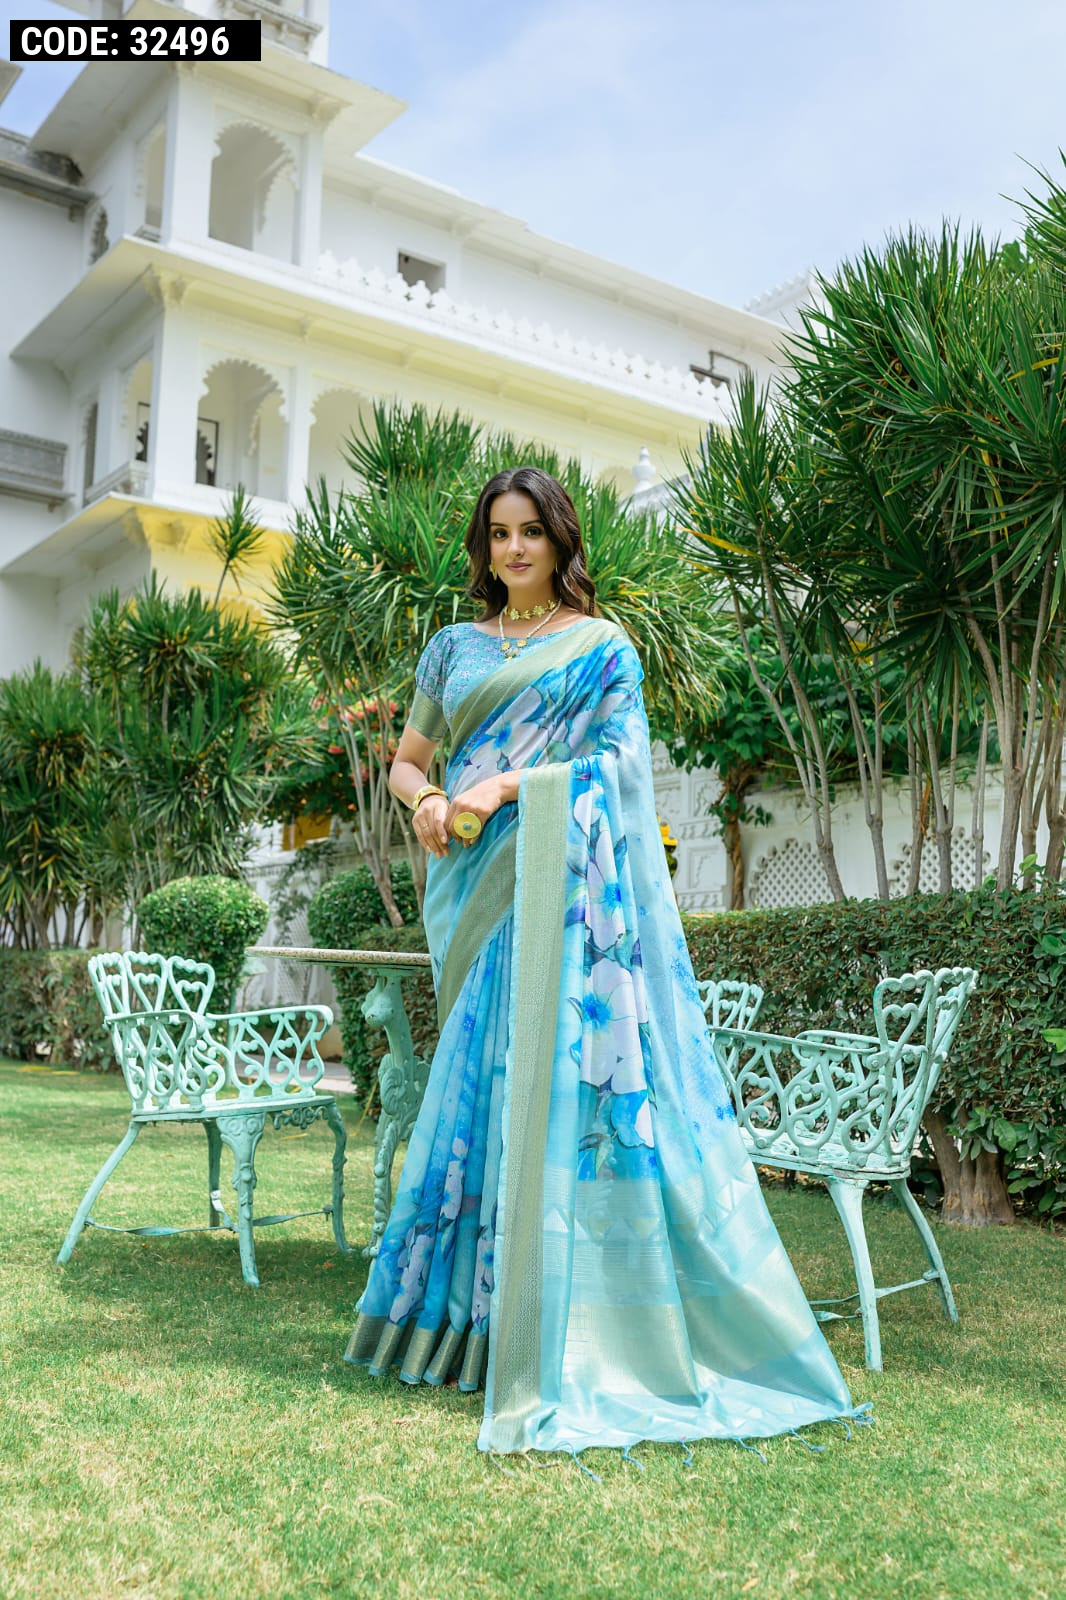 New Trend SkyBlue Color Wedding Saree Collection For Price.